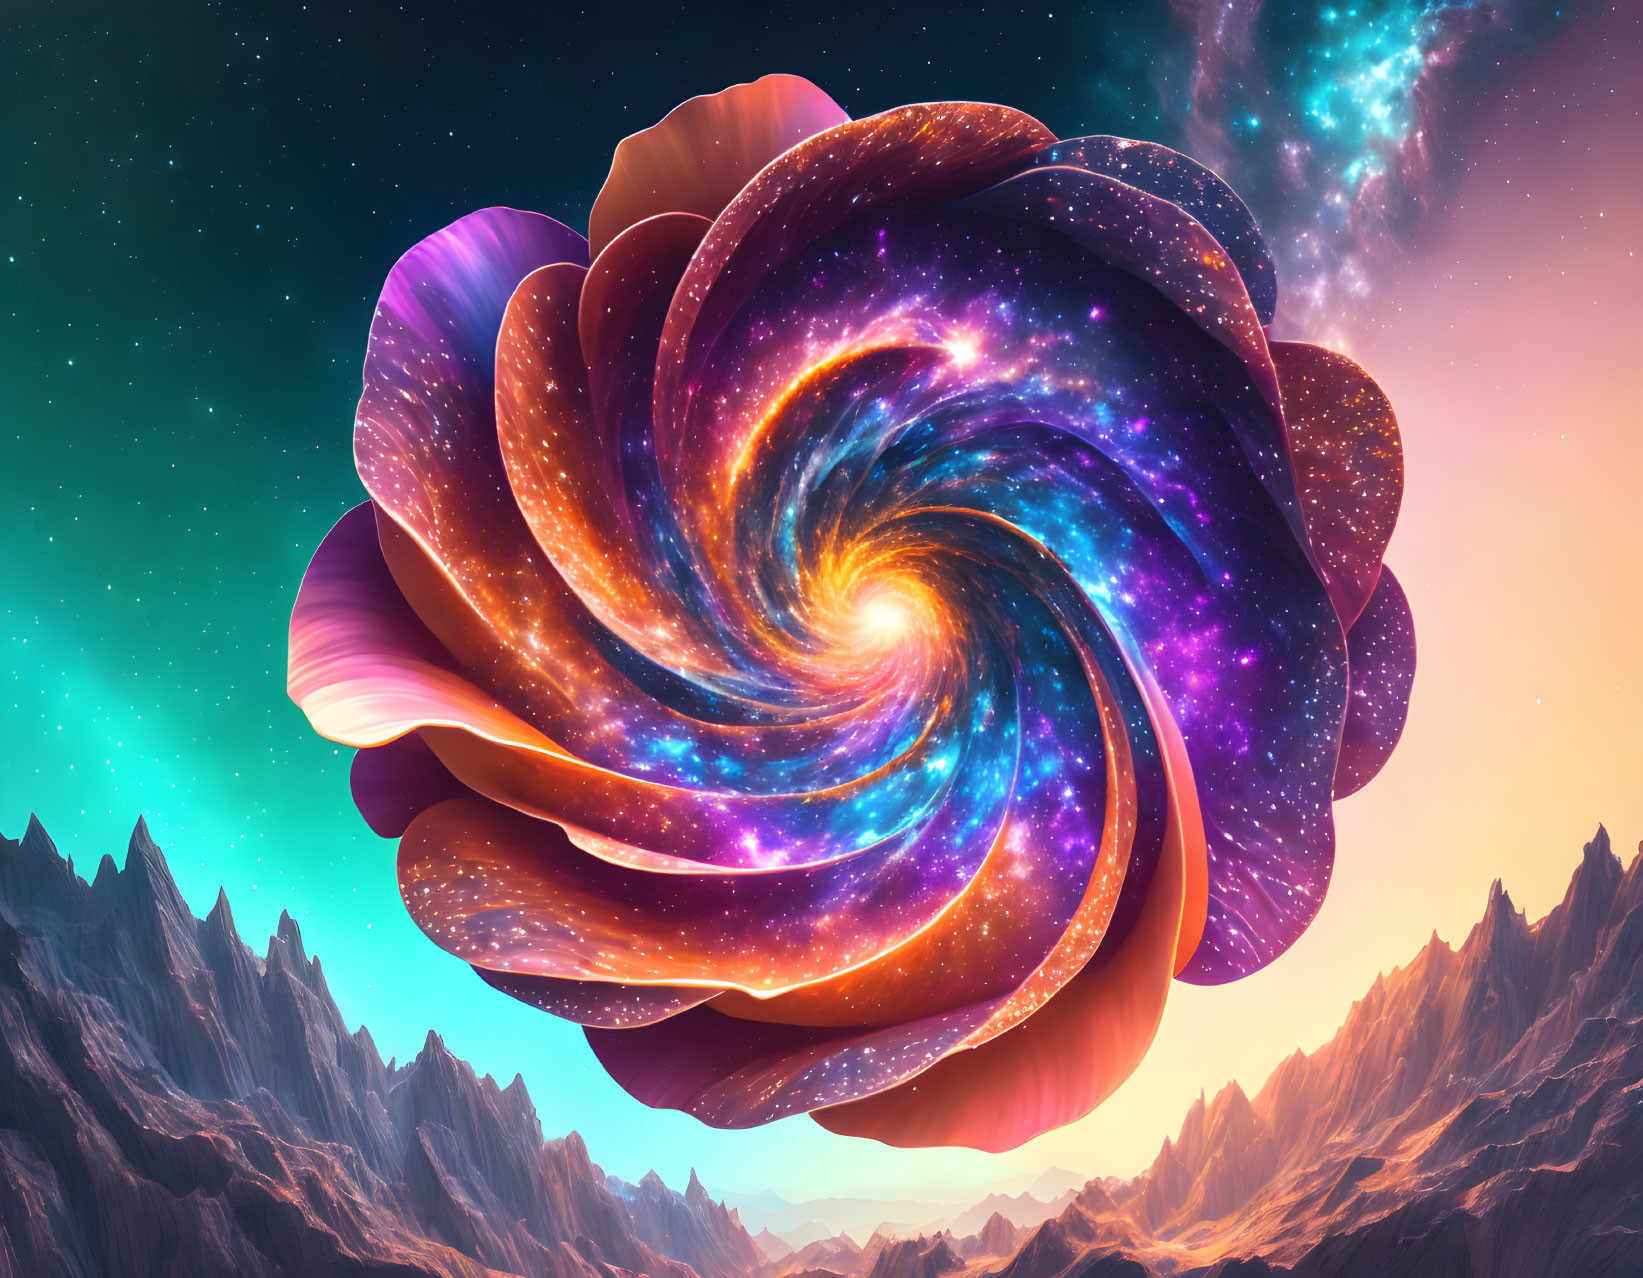 Surreal cosmic flower above rugged mountain landscape